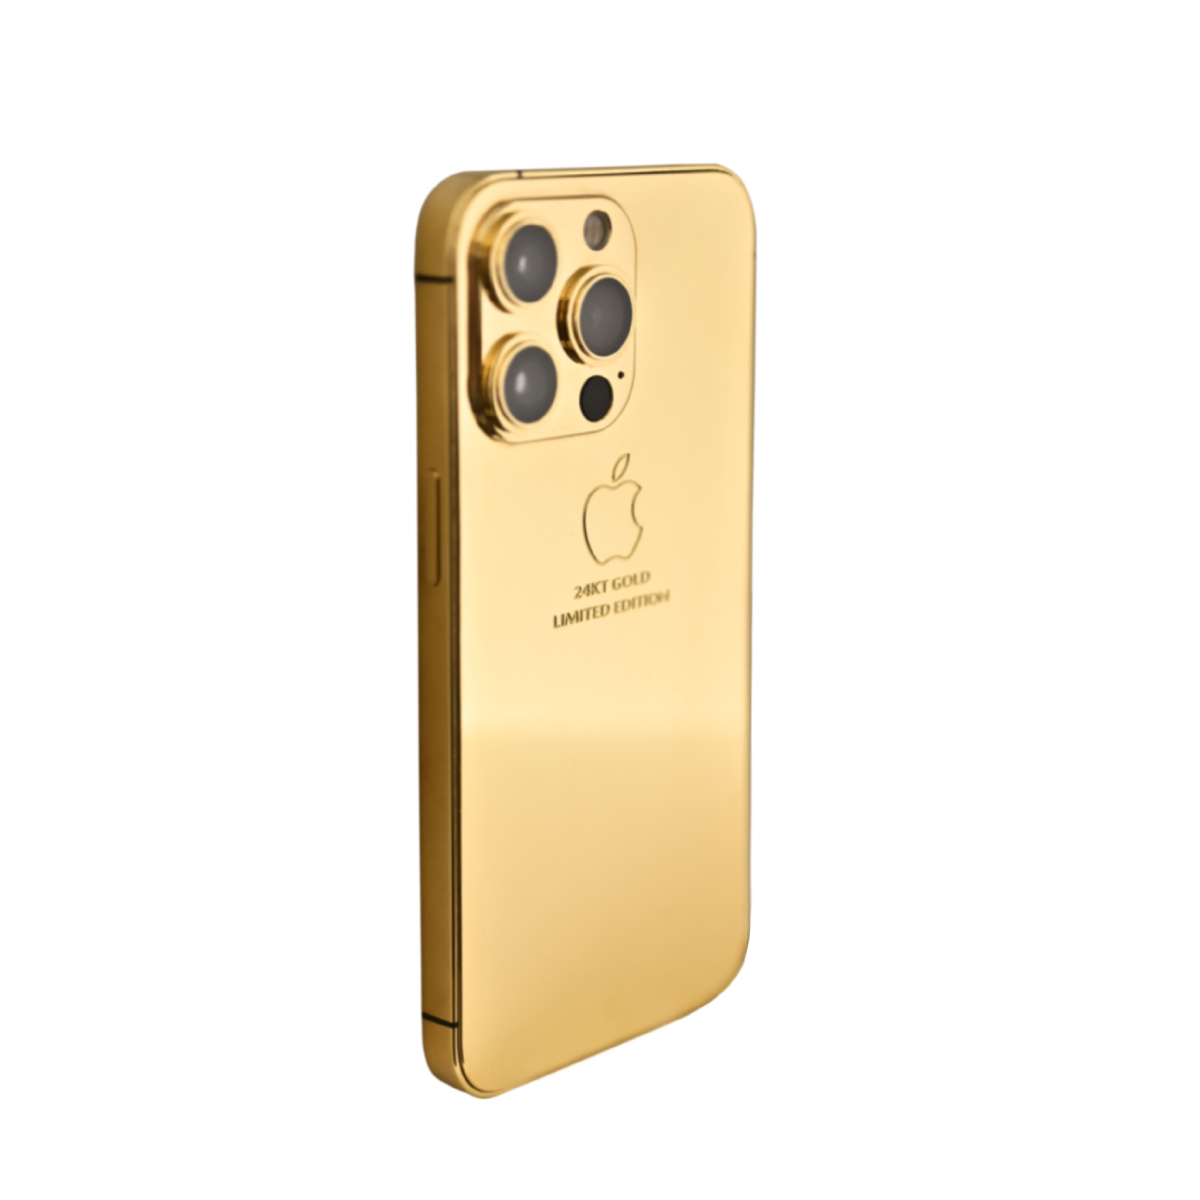 Caviar iPhone 13 Pro 24K Full Gold Limited Edition 1TB